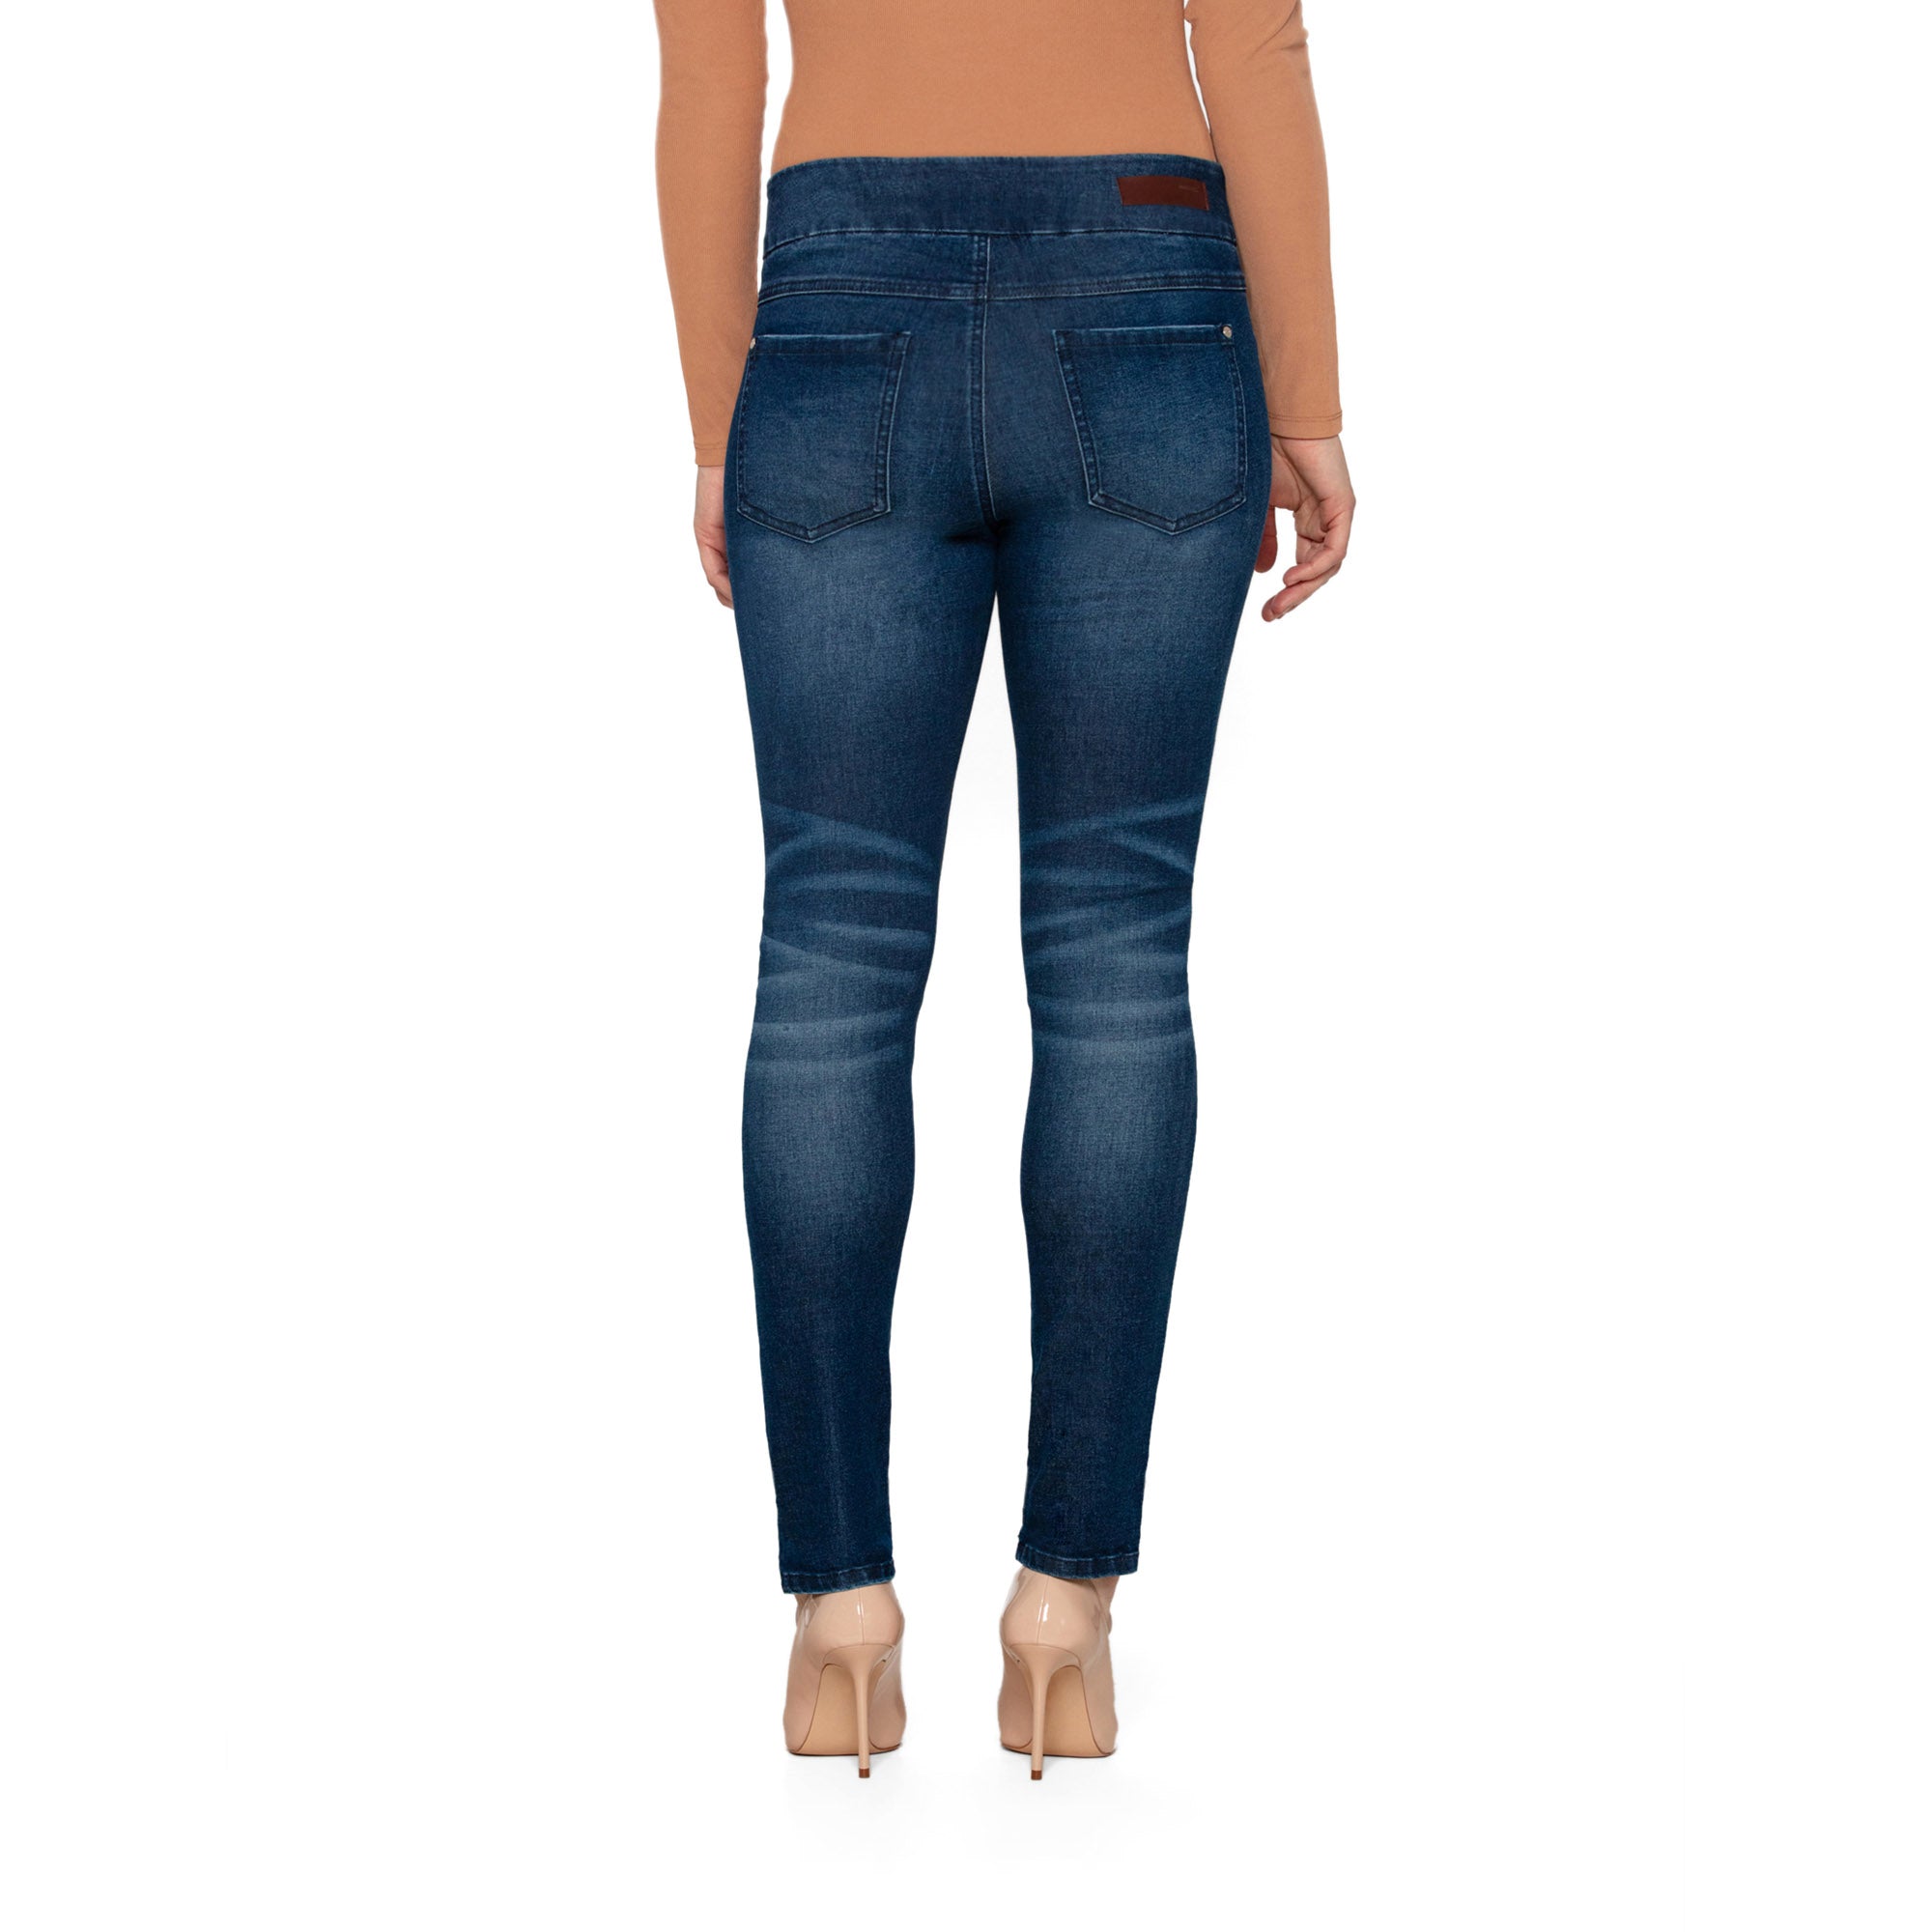 Bluberry Denim Pull-On Ankle Length Daisy